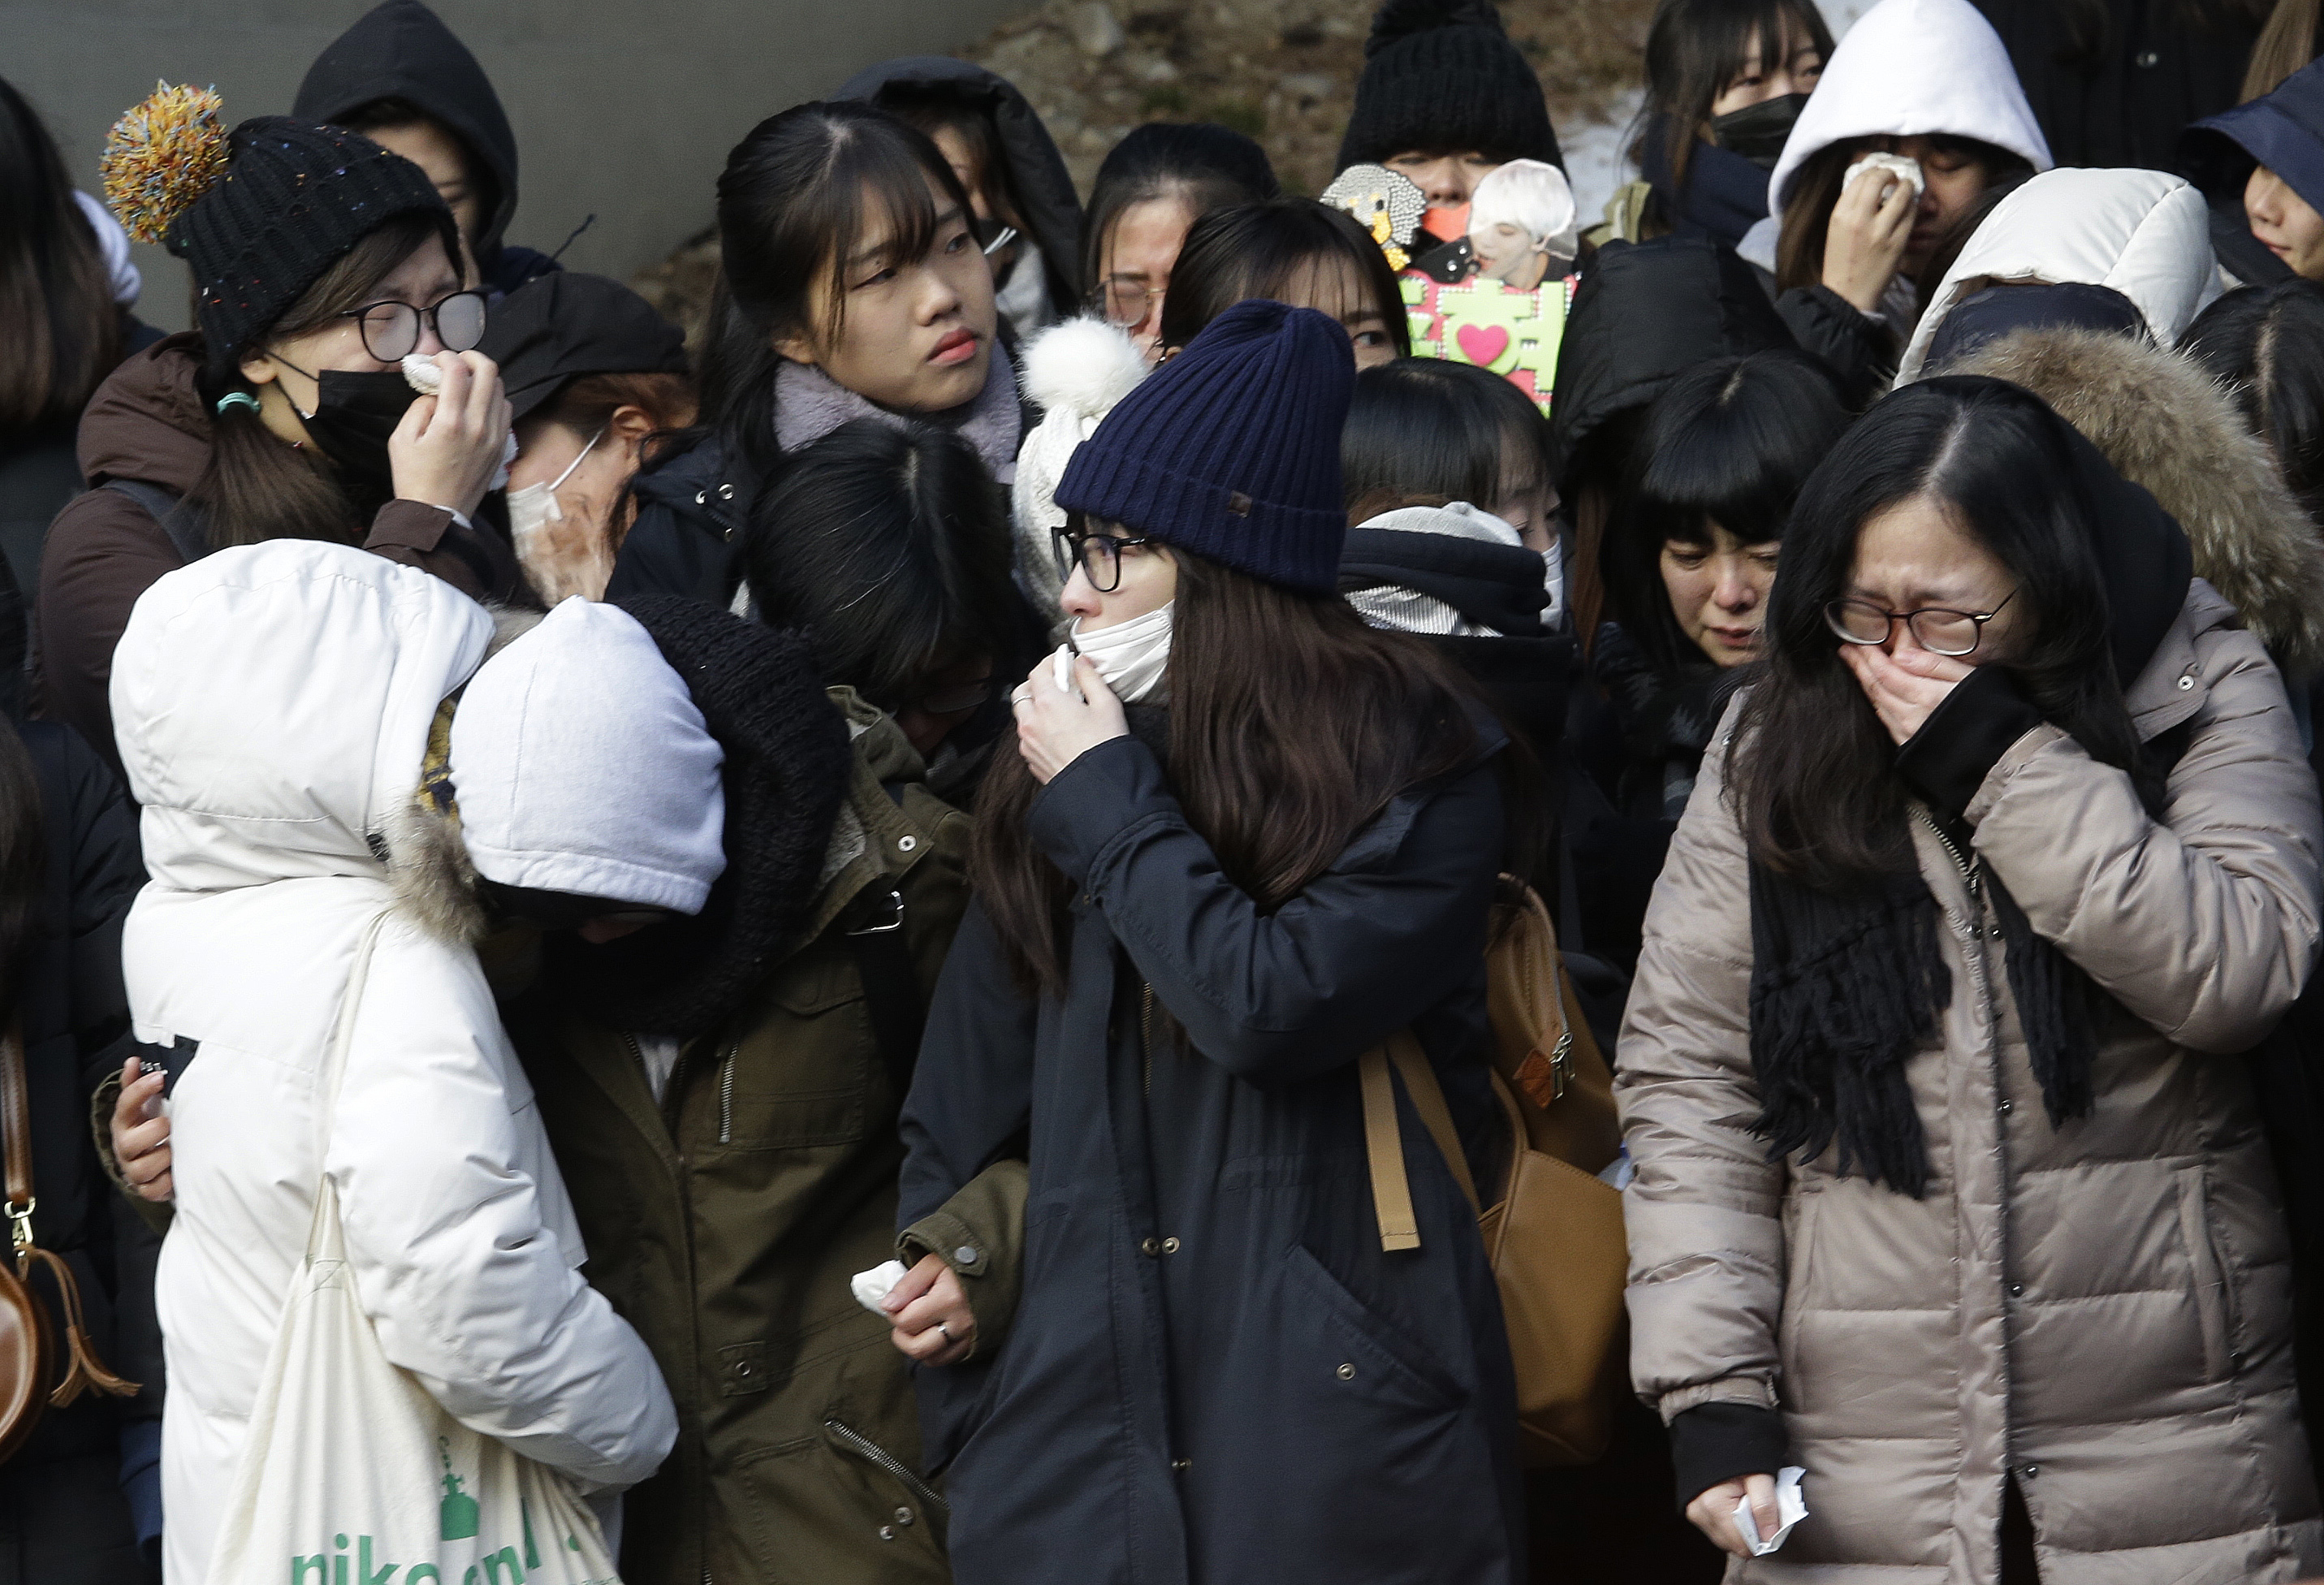 Fans react during the funeral of late South Korean singer Kim Jong-hyun, better known by the stage name Jonghyun, a member of South Korean K-pop group SHINee, in Seoul, South Korea on Dec. 21, 2017. (Ahn Young-joon&mdash;AP)